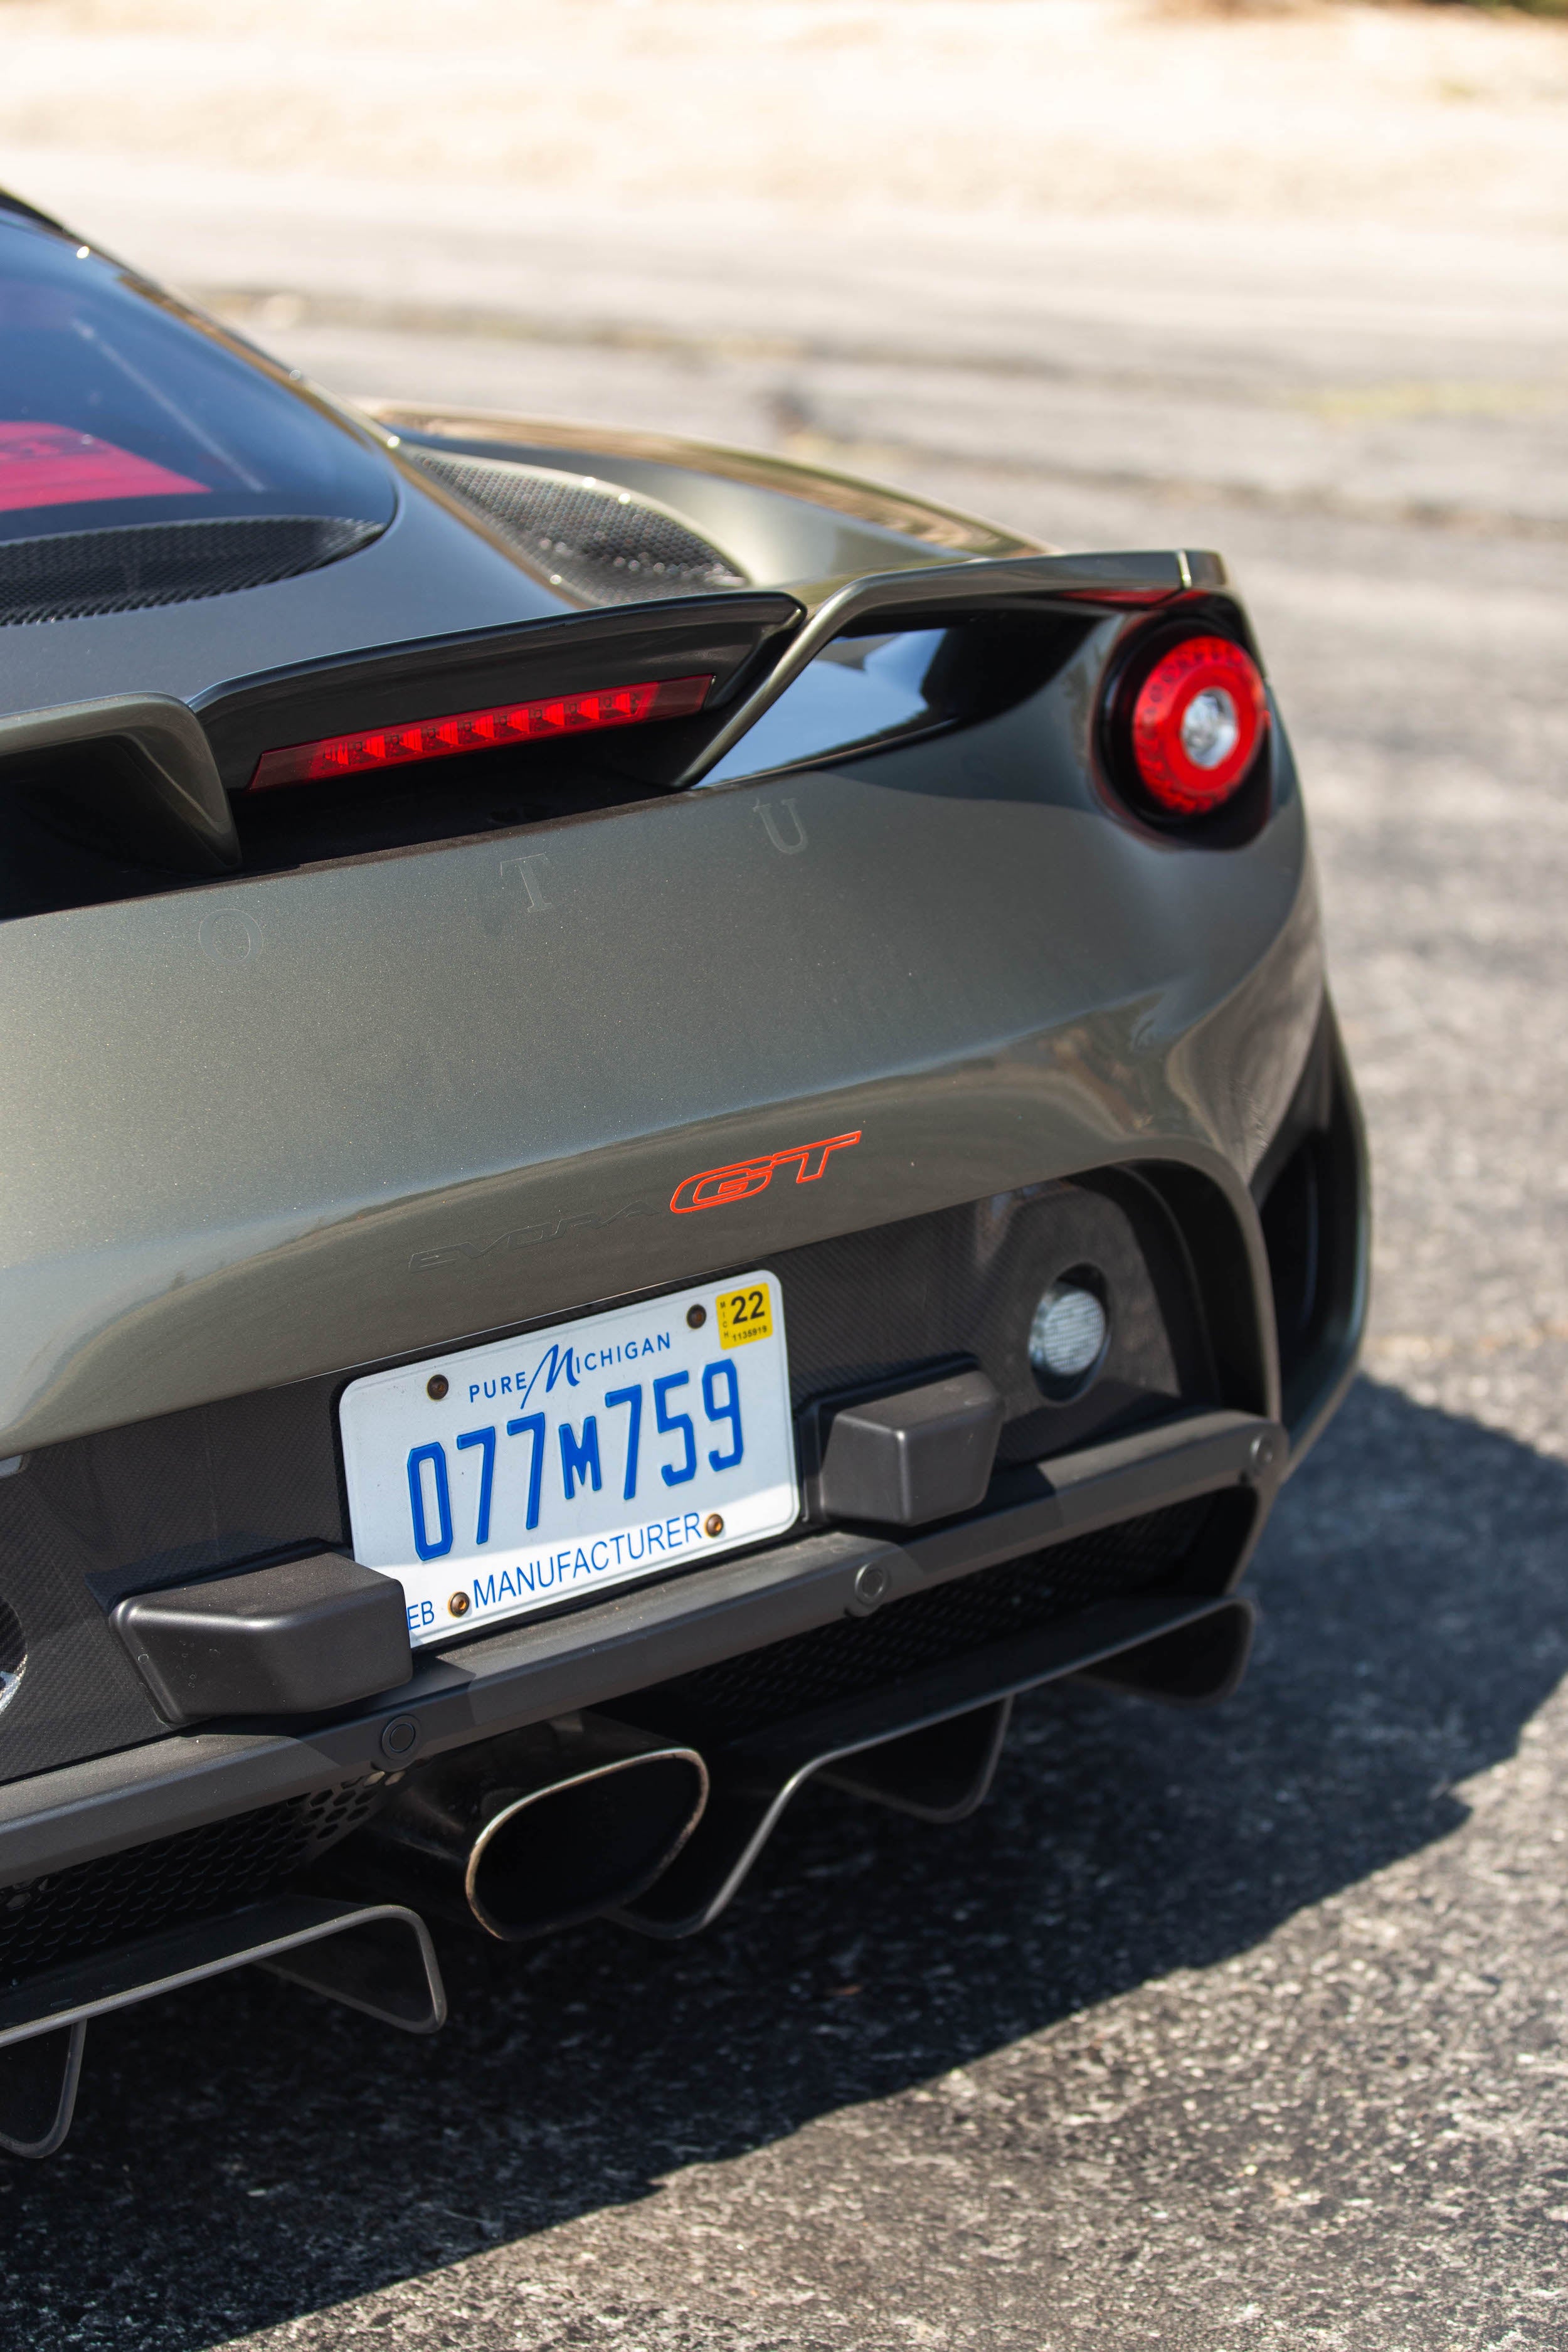 2021 Lotus Evora GT Review: Farewell to the Perfectly Imperfect Sports Car